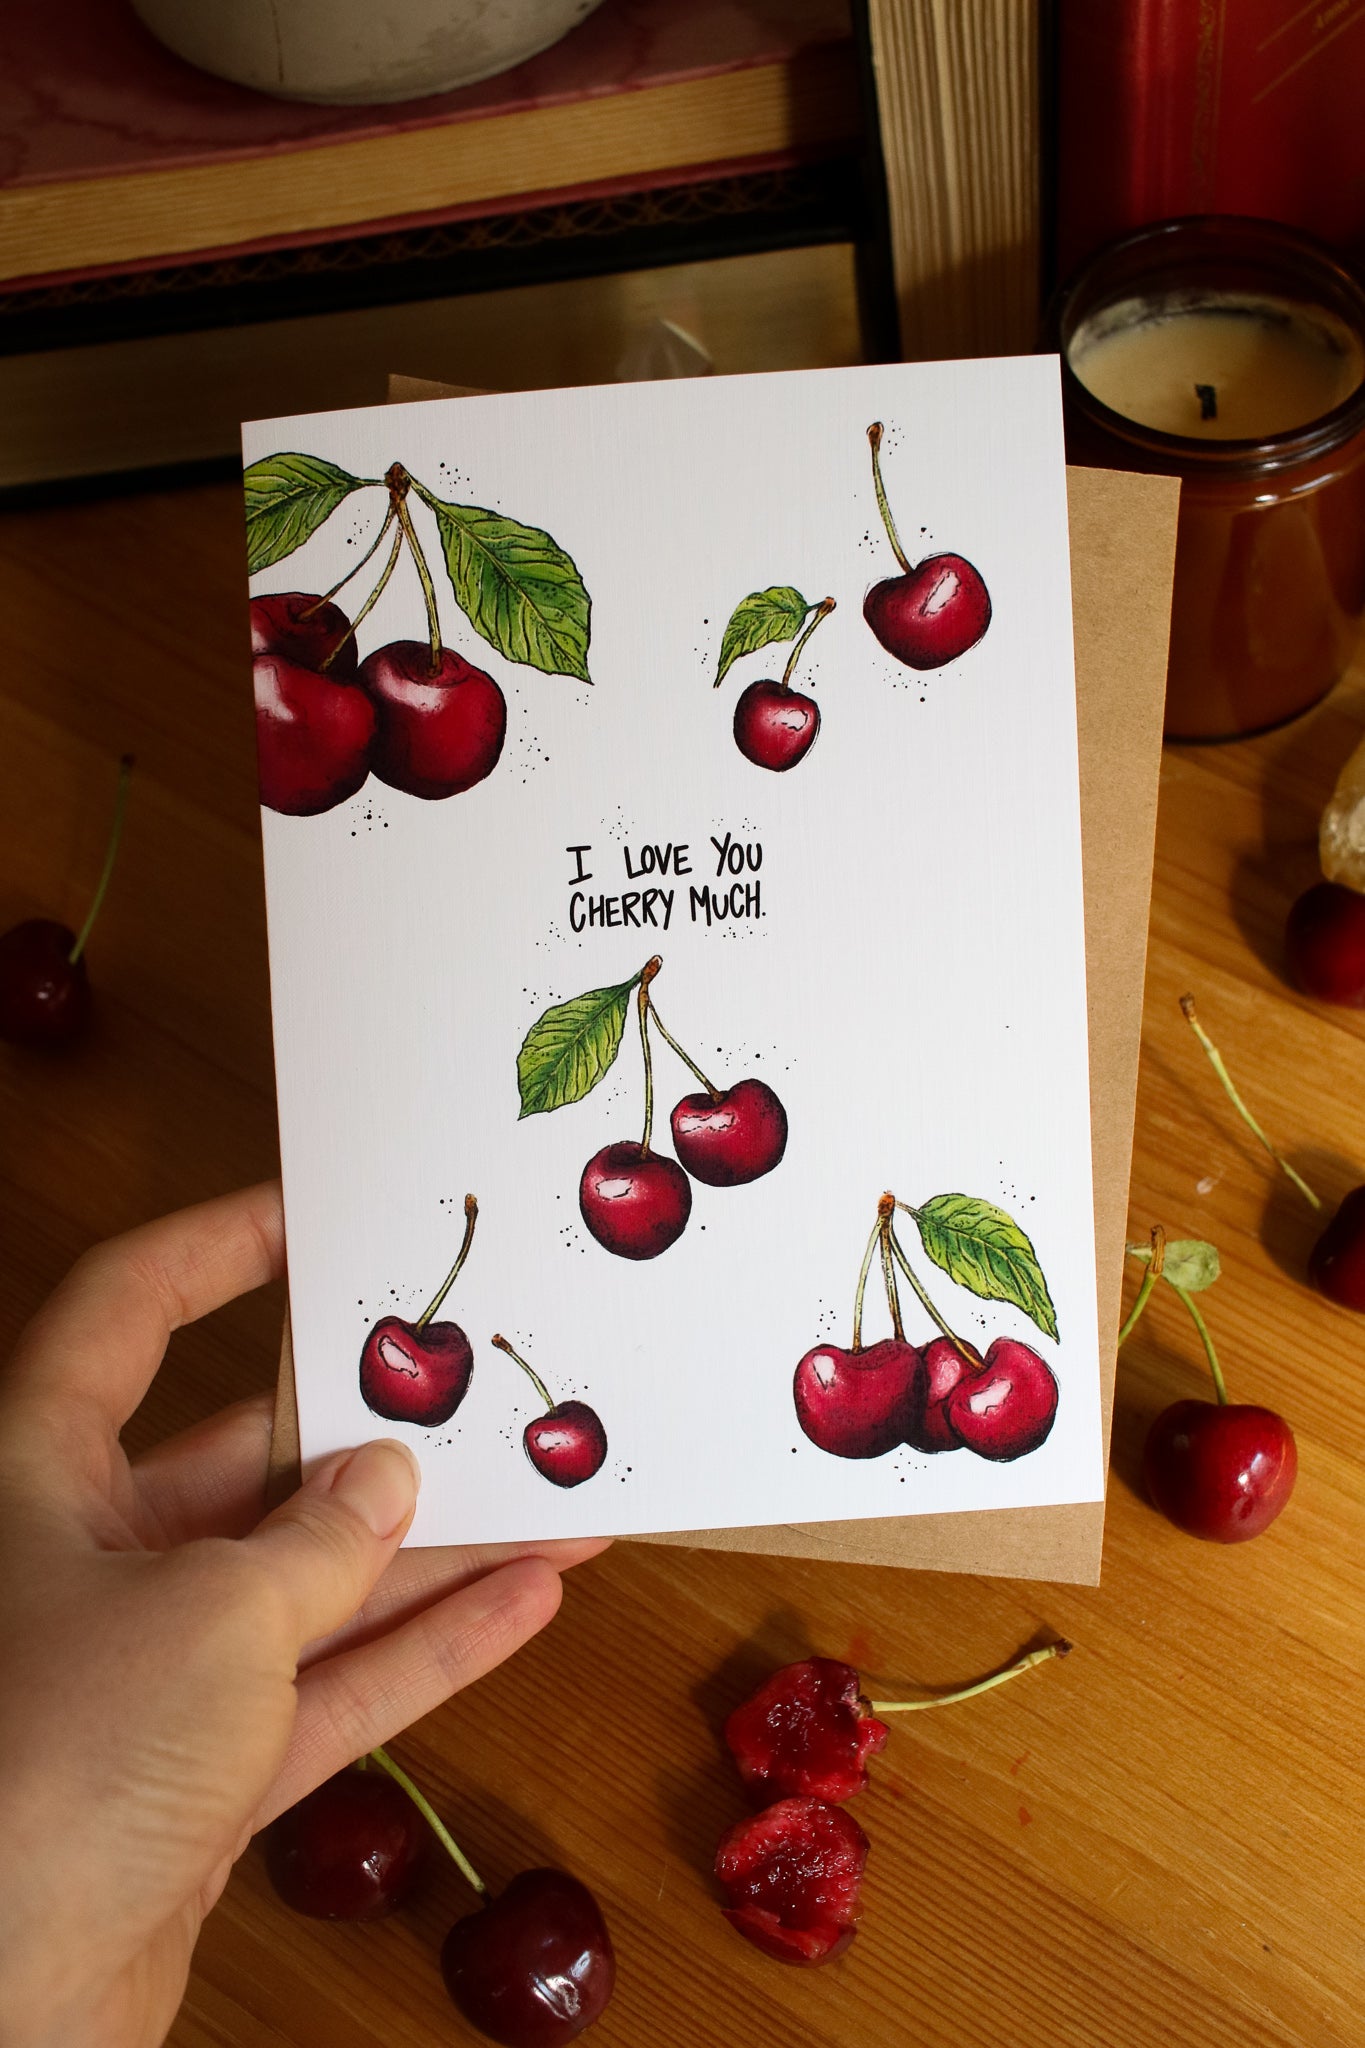 I Love You Cherry Much! - Greeting Card